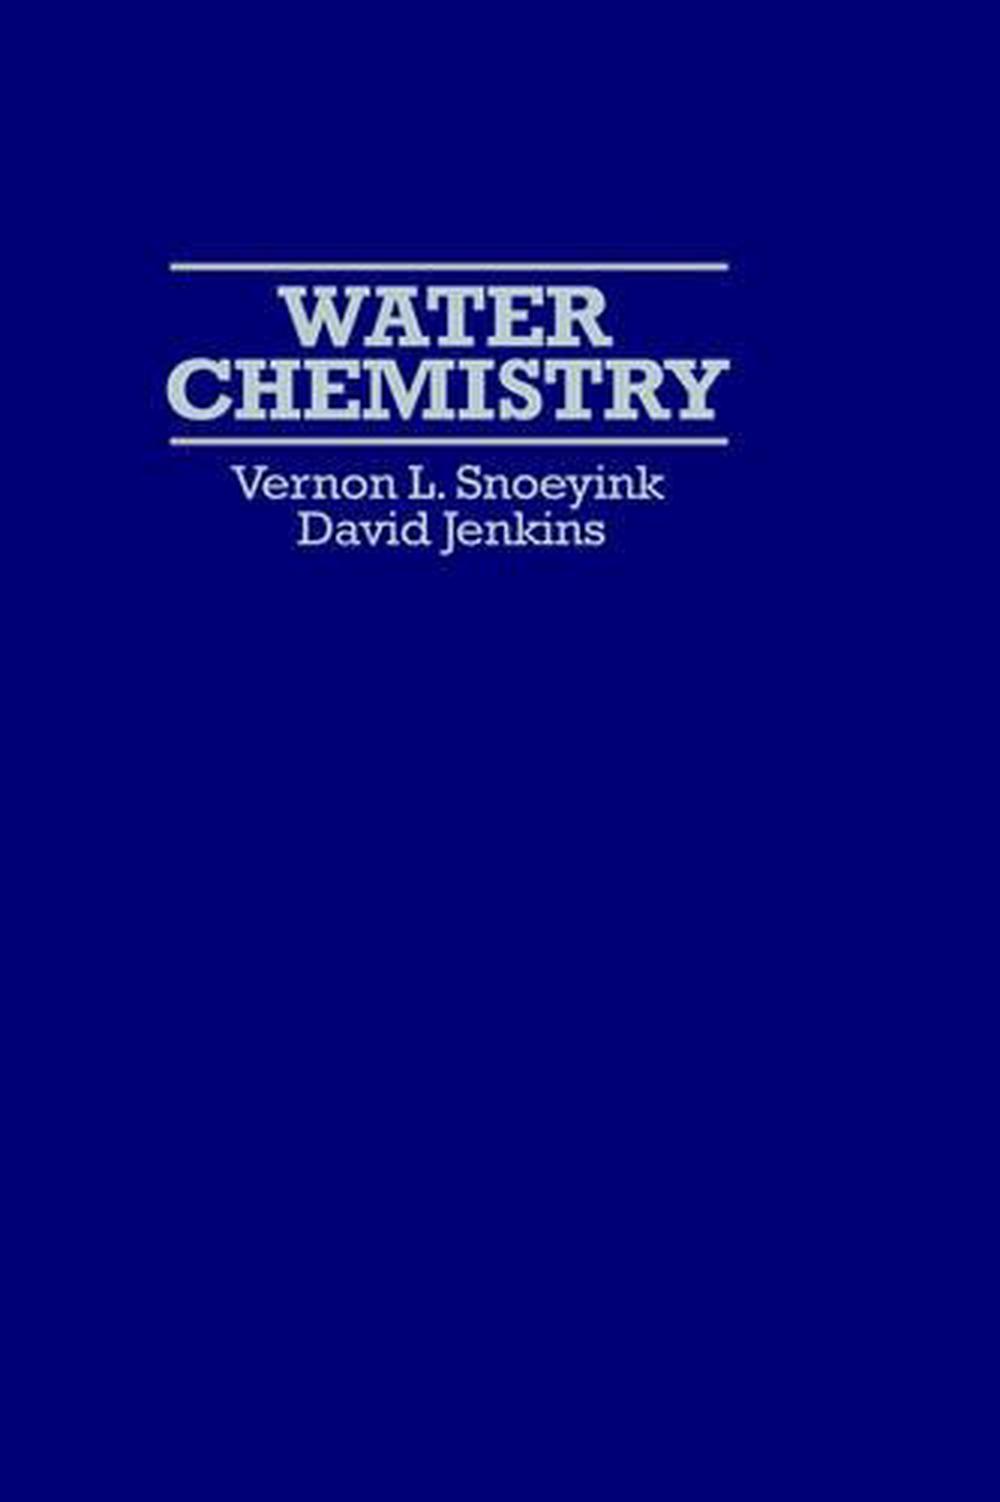 Water Chemistry by Vernon L. Snoeyink (English) Hardcover Book Free